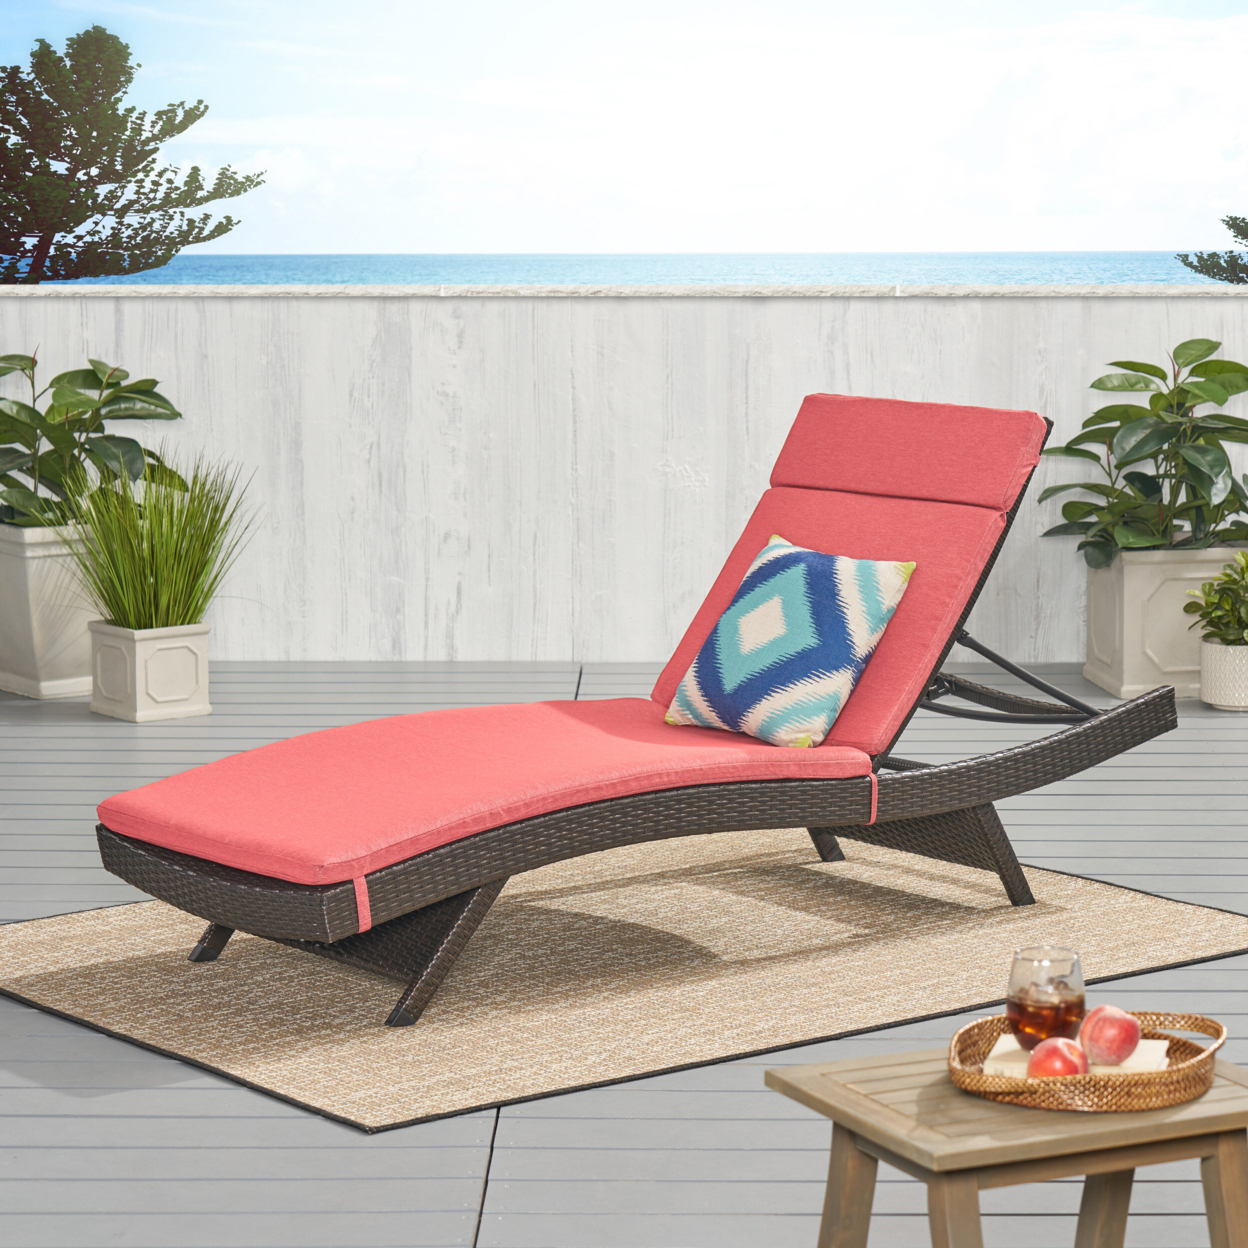 Lakeport Outdoor Adjustable Chaise Lounge Chair With Cushion - Caramel Cushion